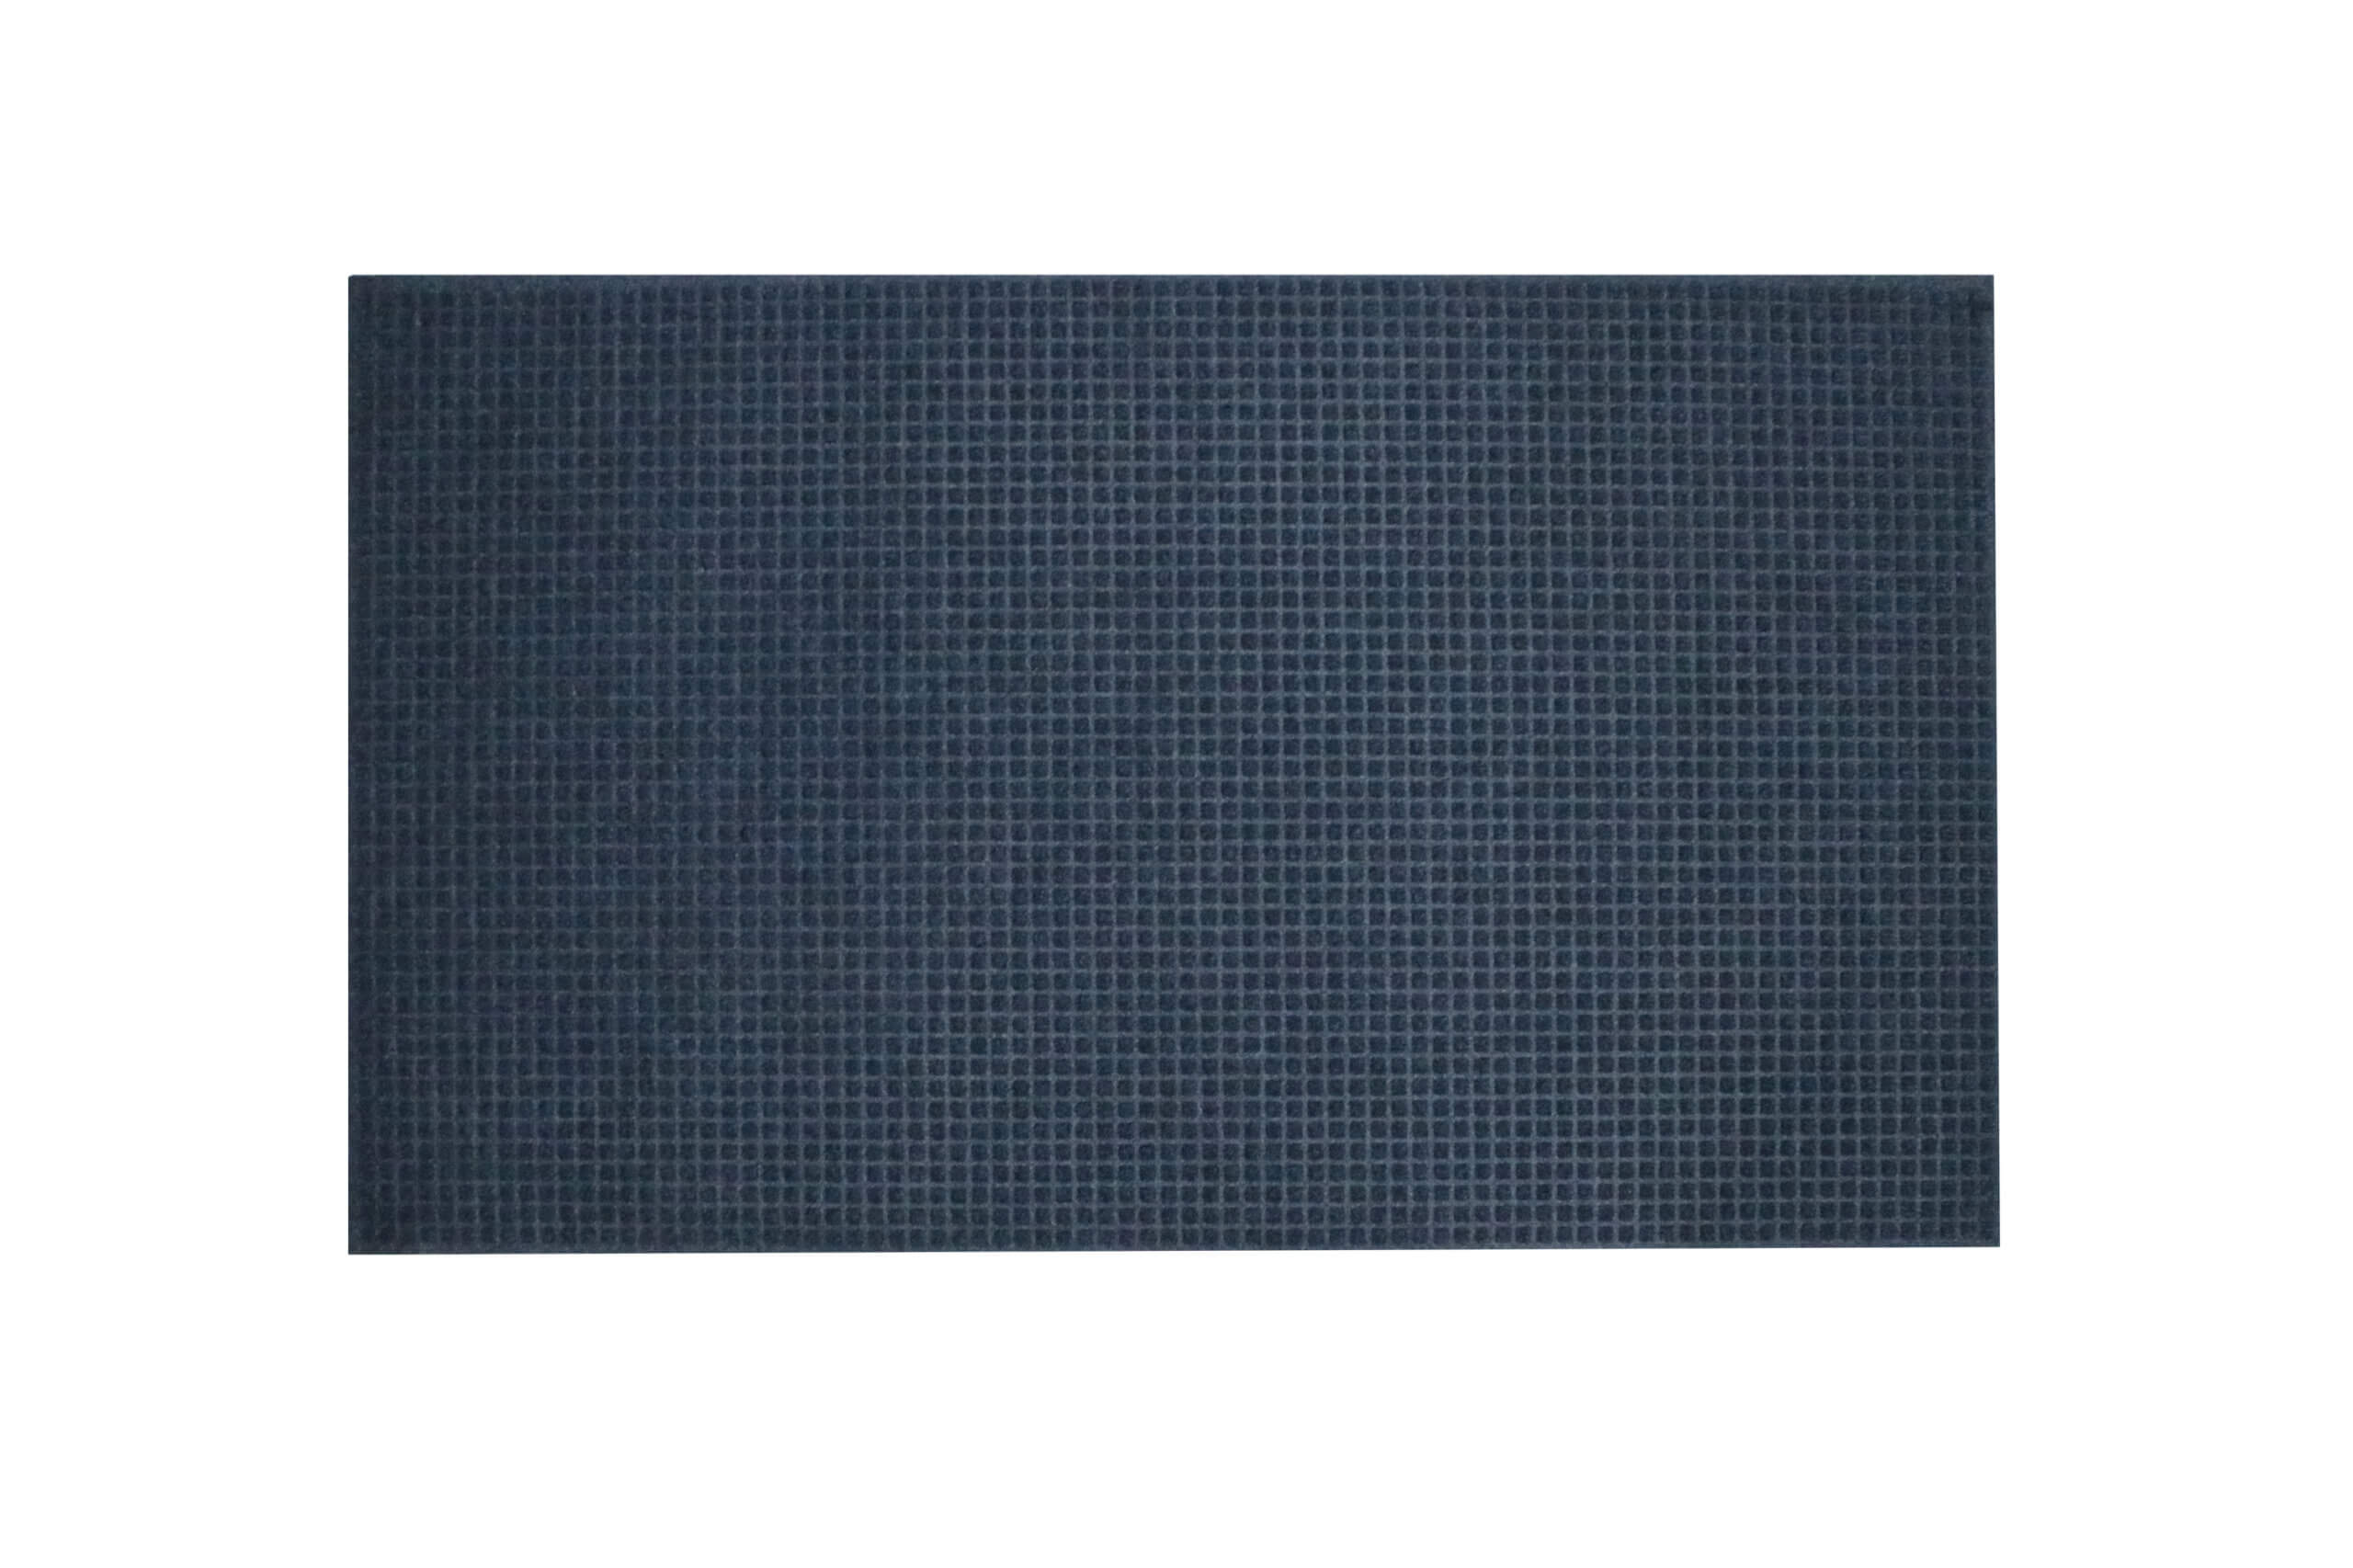 WaterHog™ Drainable Border Outdoor Mats 4ft x 6ft (42.75in x 67.5in) - Charcoal-154, Smooth Backing 